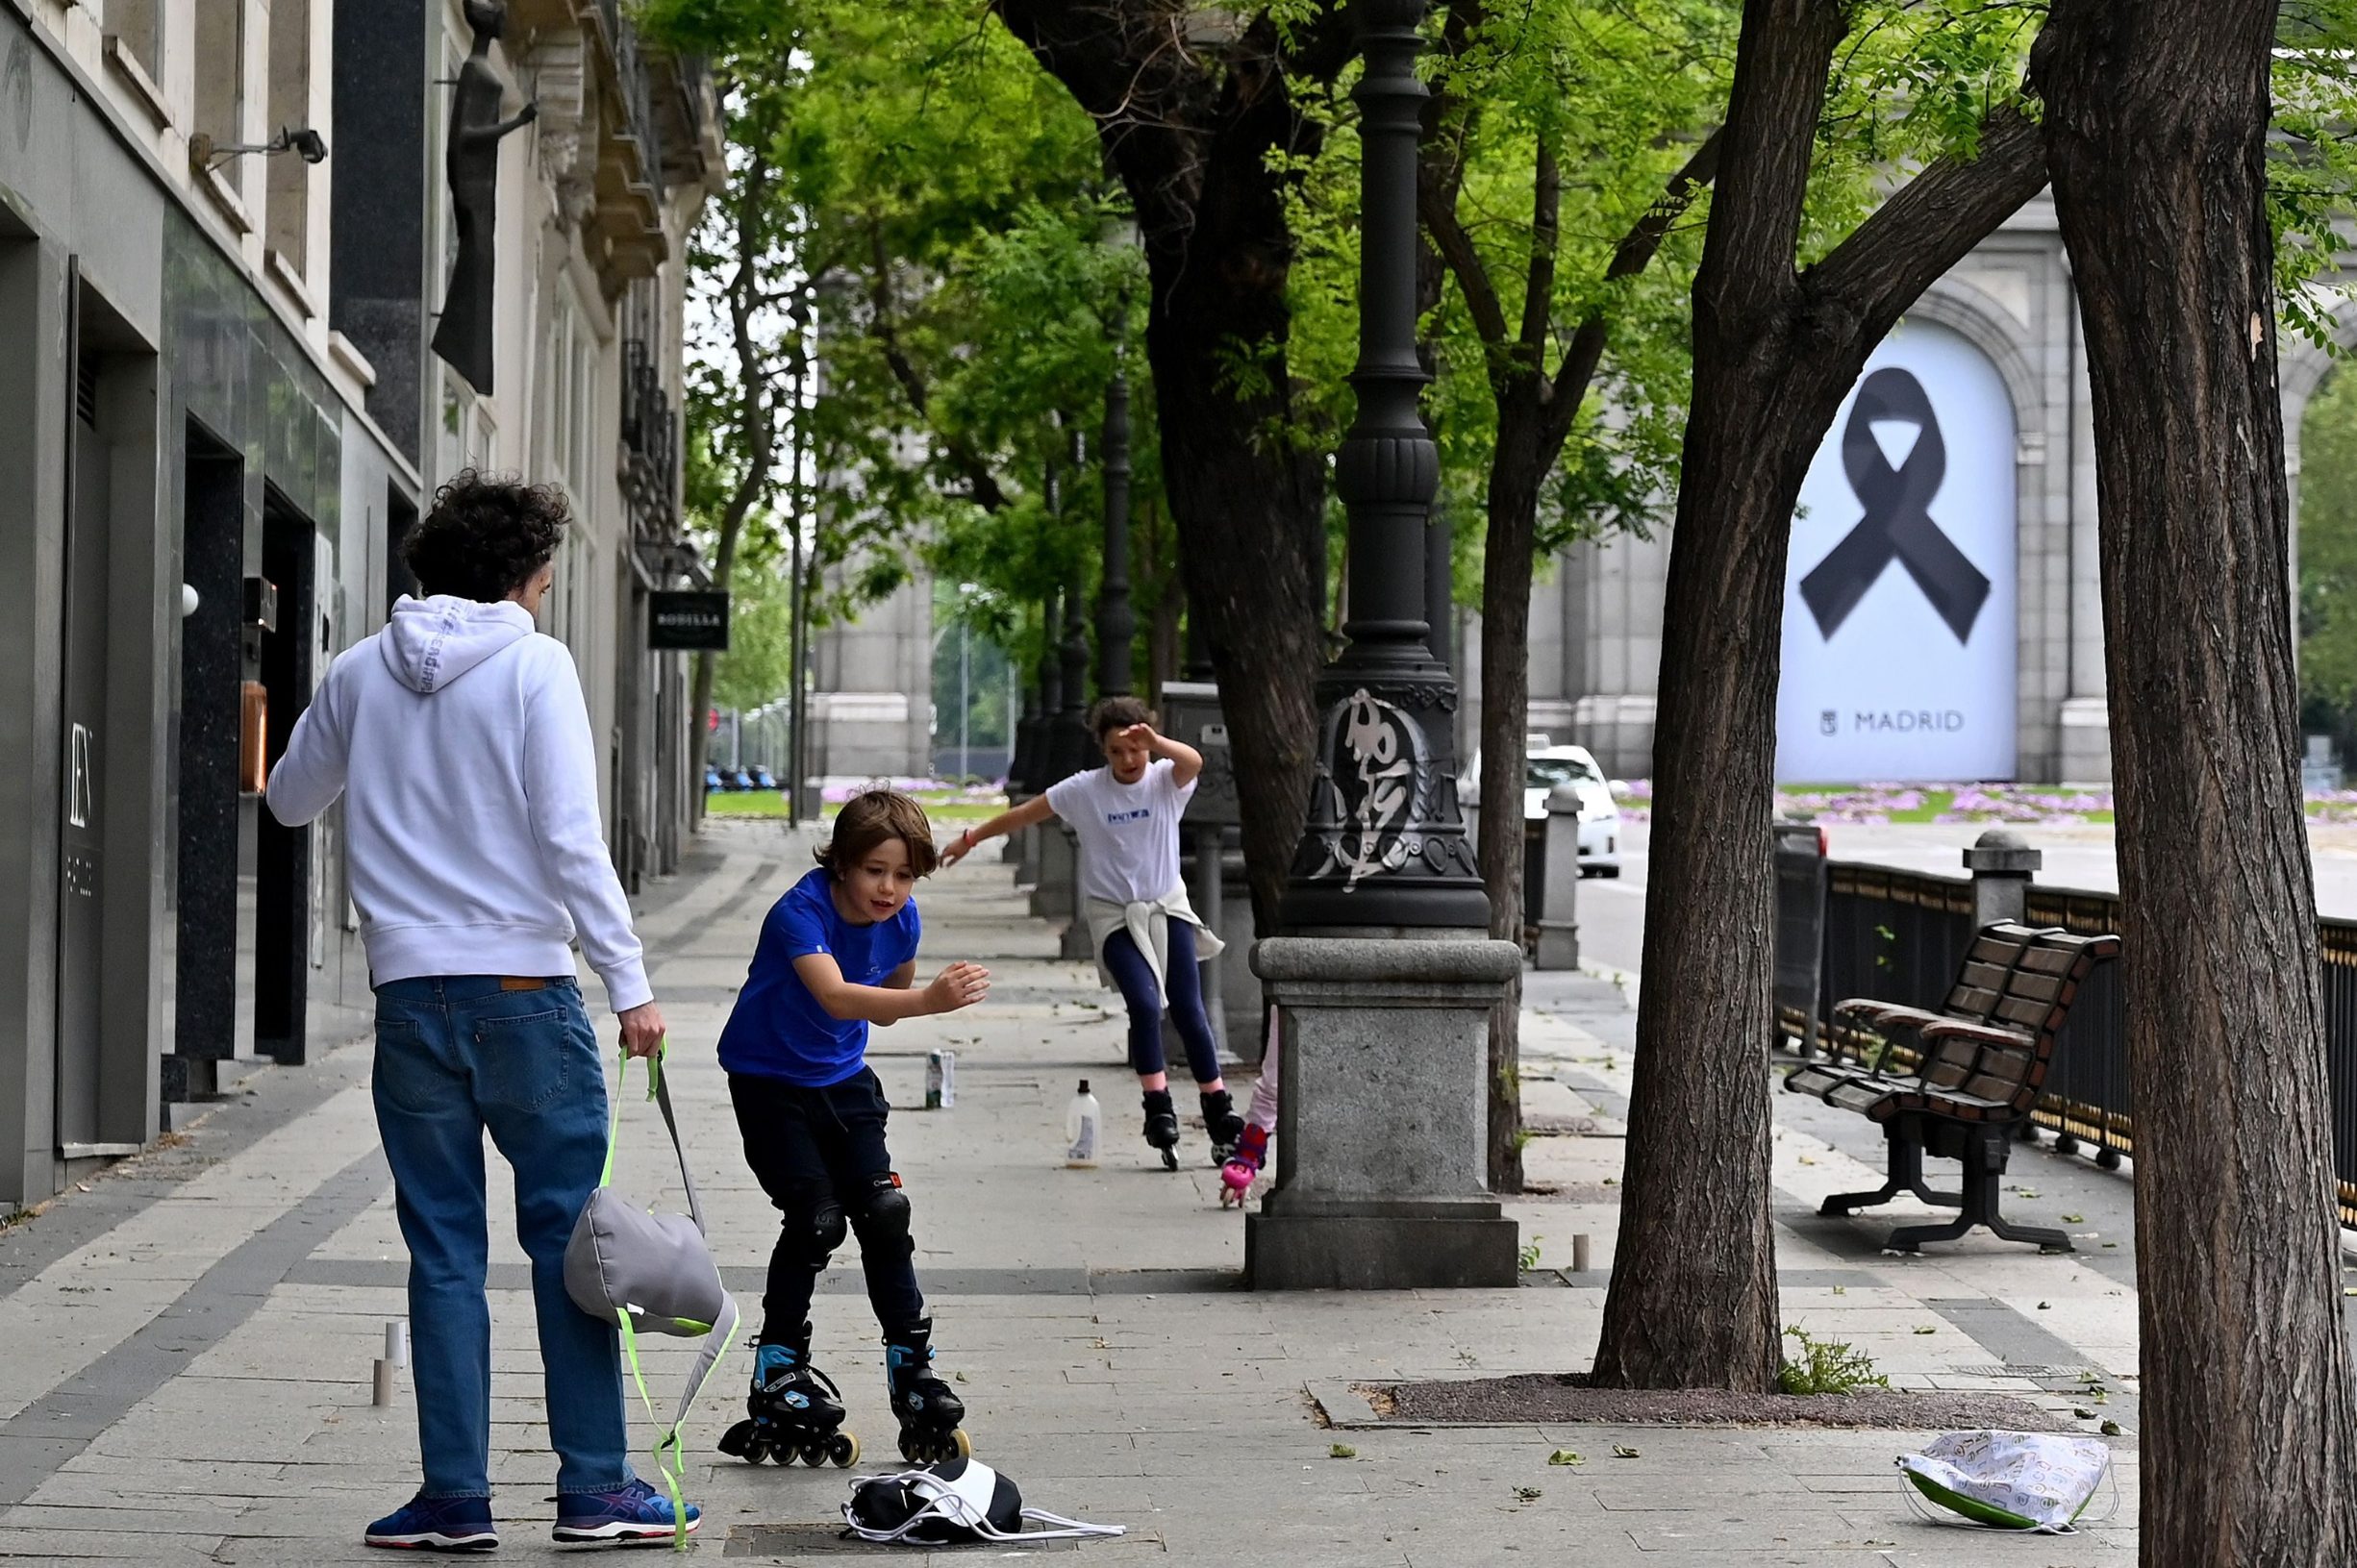 Some children skate on the pavement in Madrid on April 26, 2020 during a national lockdown to prevent the spread of the COVID-19 disease. - After six weeks stuck at home, Spain's children were being allowed out today to run, play or go for a walk as the government eased one of the world's toughest coronavirus lockdowns. Spain is one of the hardest hit countries, with a death toll running a more than 23,000 to put it behind only the United States and Italy despite stringent restrictions imposed from March 14, including keeping all children indoors. Today, with their scooters, tricycles or in prams, the children accompanied by their parents came out onto largely deserted streets. (Photo by Gabriel BOUYS / AFP)